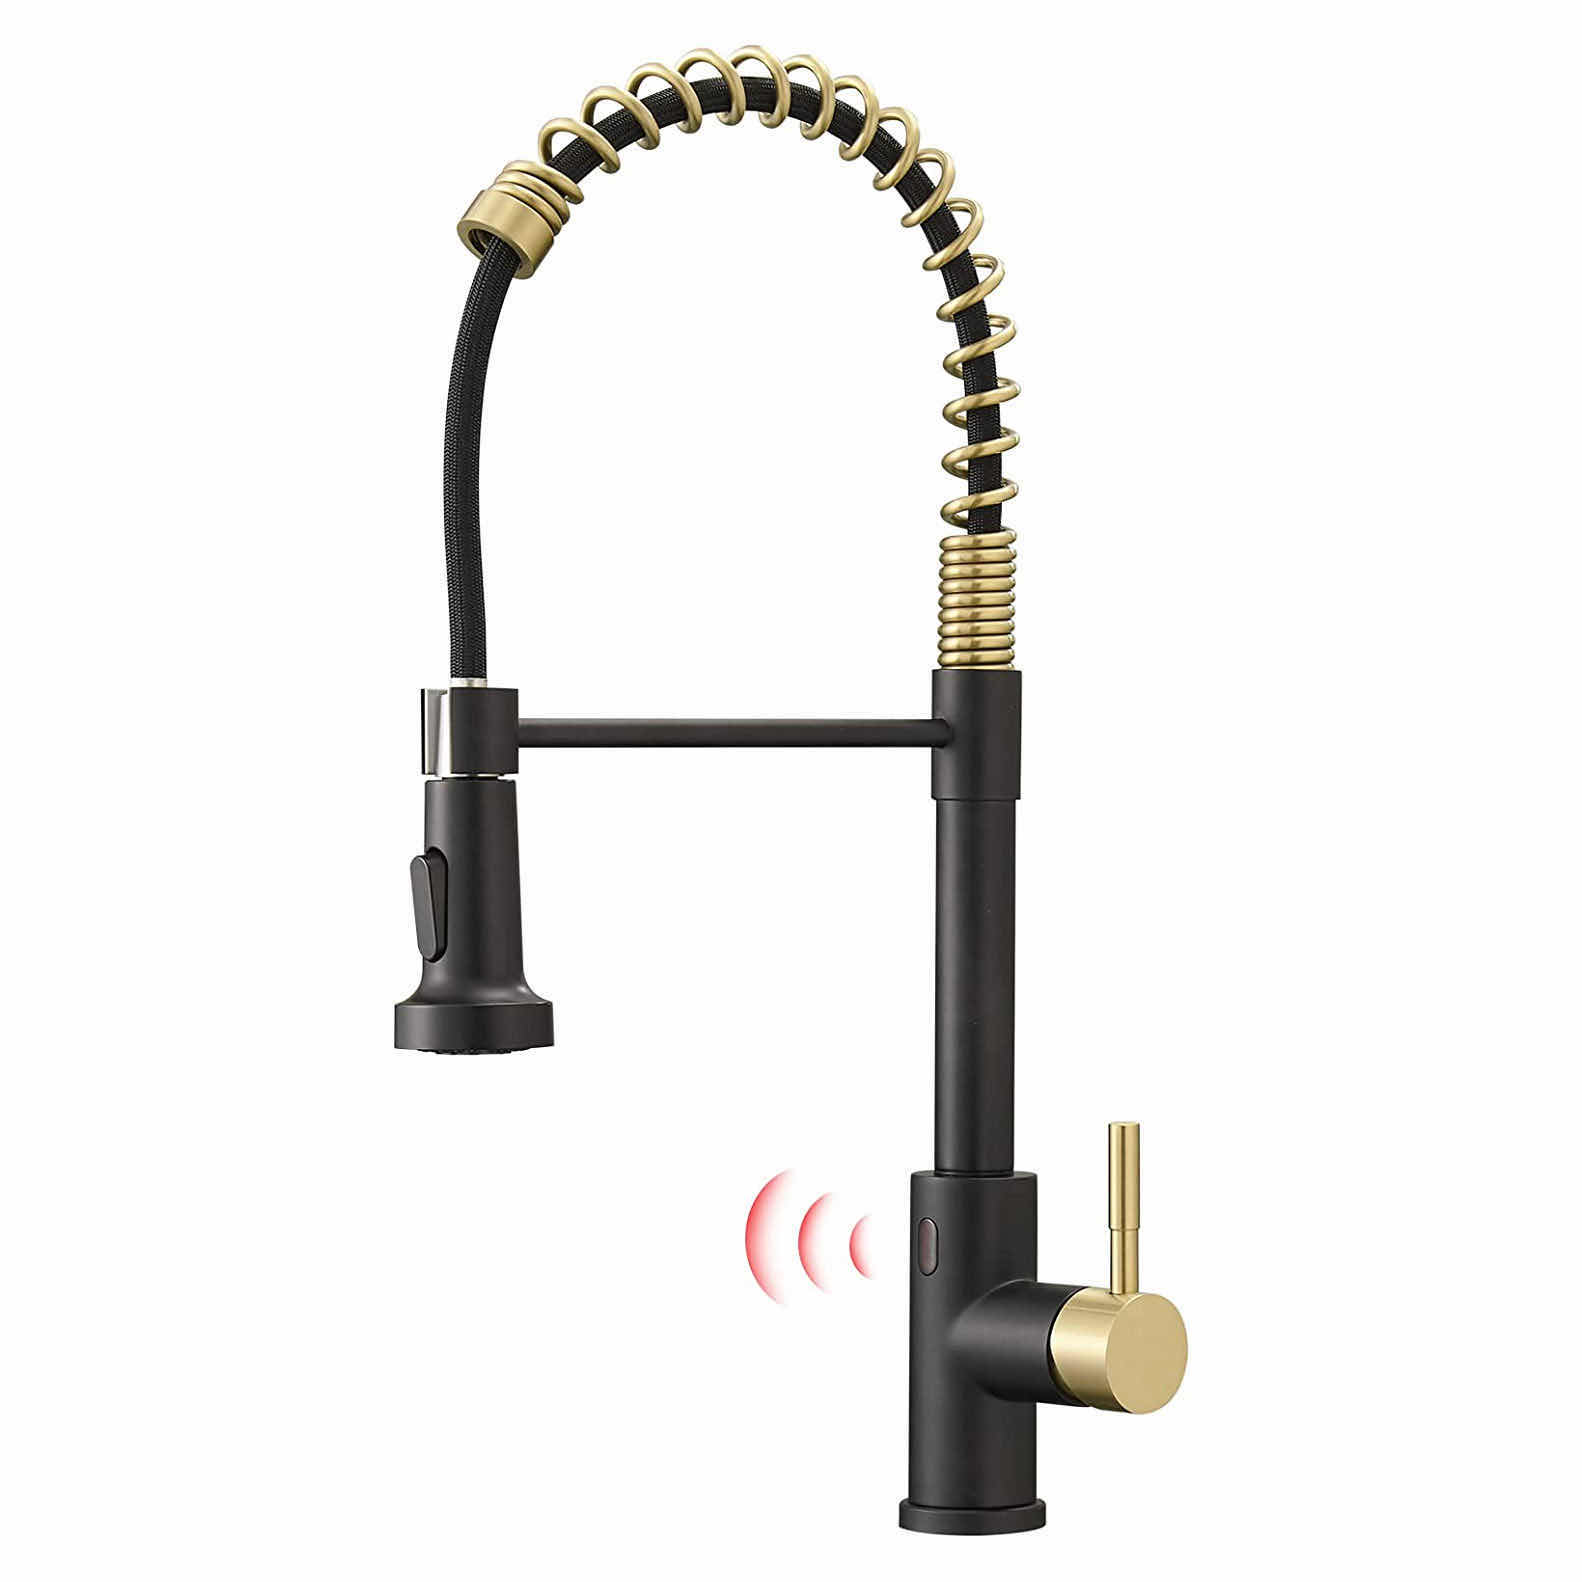 Photo 1 of SENOR FAUCET TOUCHLESS MOTION SENSOR BLACK & GOLD KITCHEN FAUCET W PULL DOWN SPRAYER